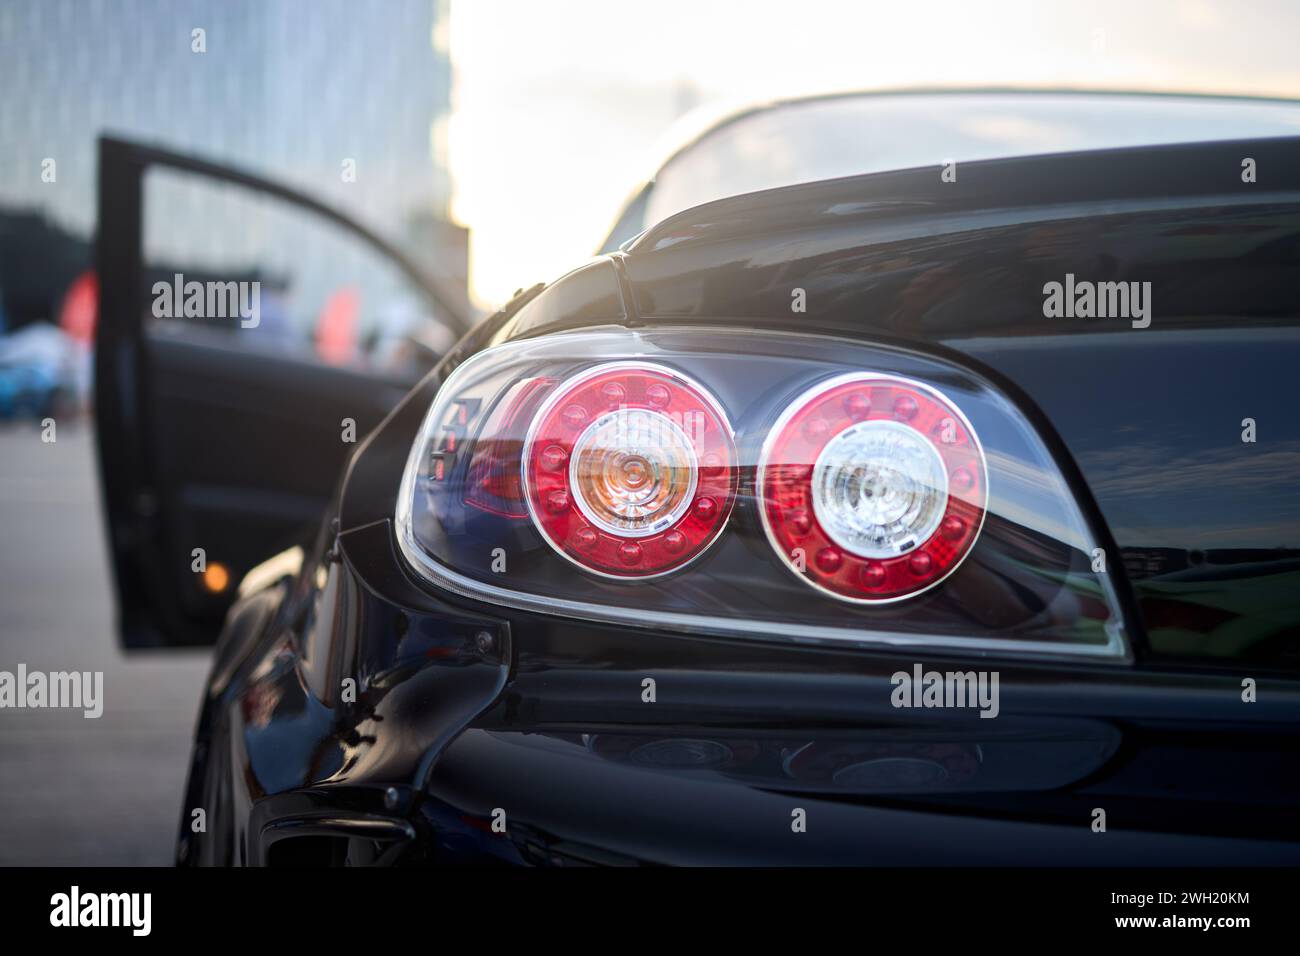 Berlin, Germany - August 20, 2022: Car Detail Shot of Mazda RX-8. Rearlight of black metallic car shot closeup with opened door out of focus Stock Photo